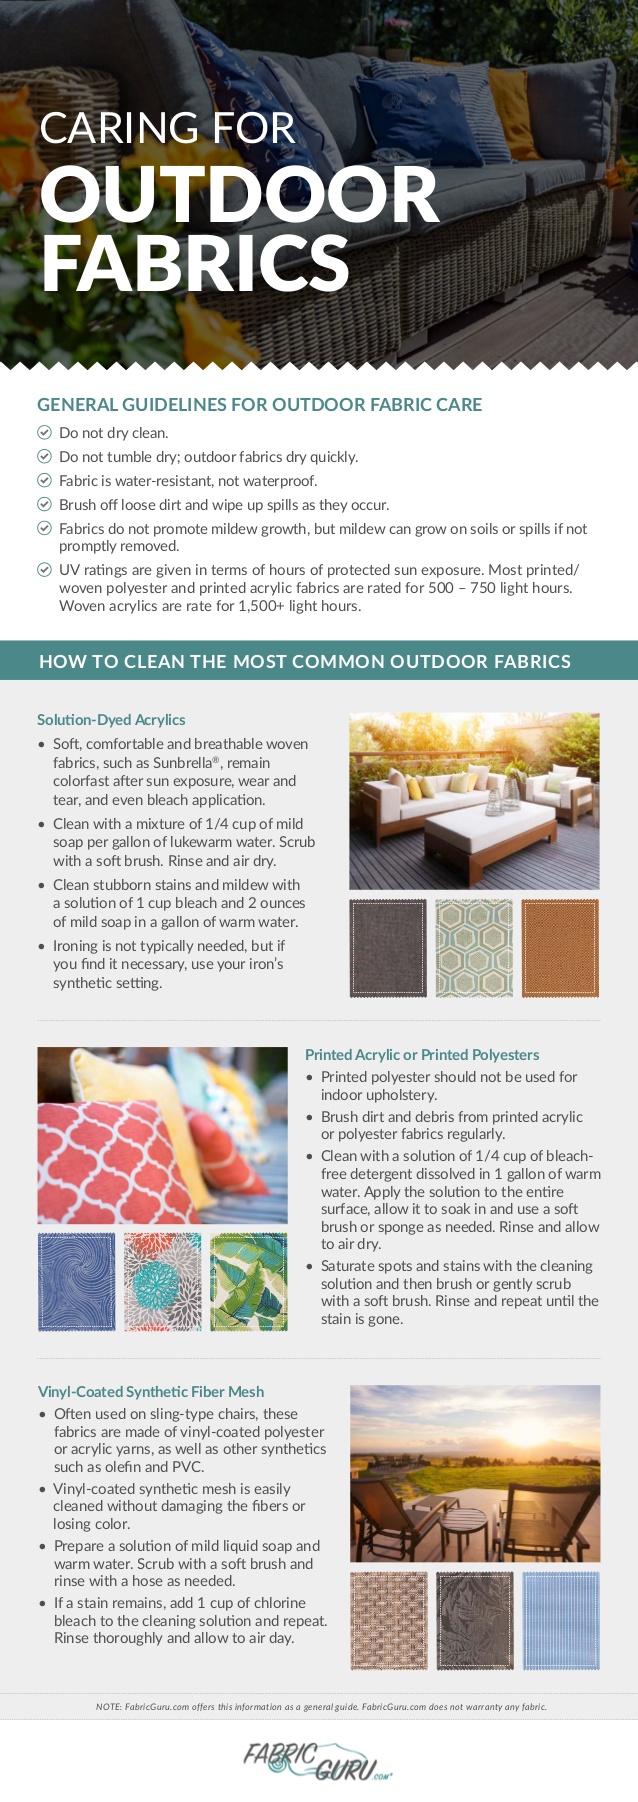 Cleaning Outdoor Fabrics